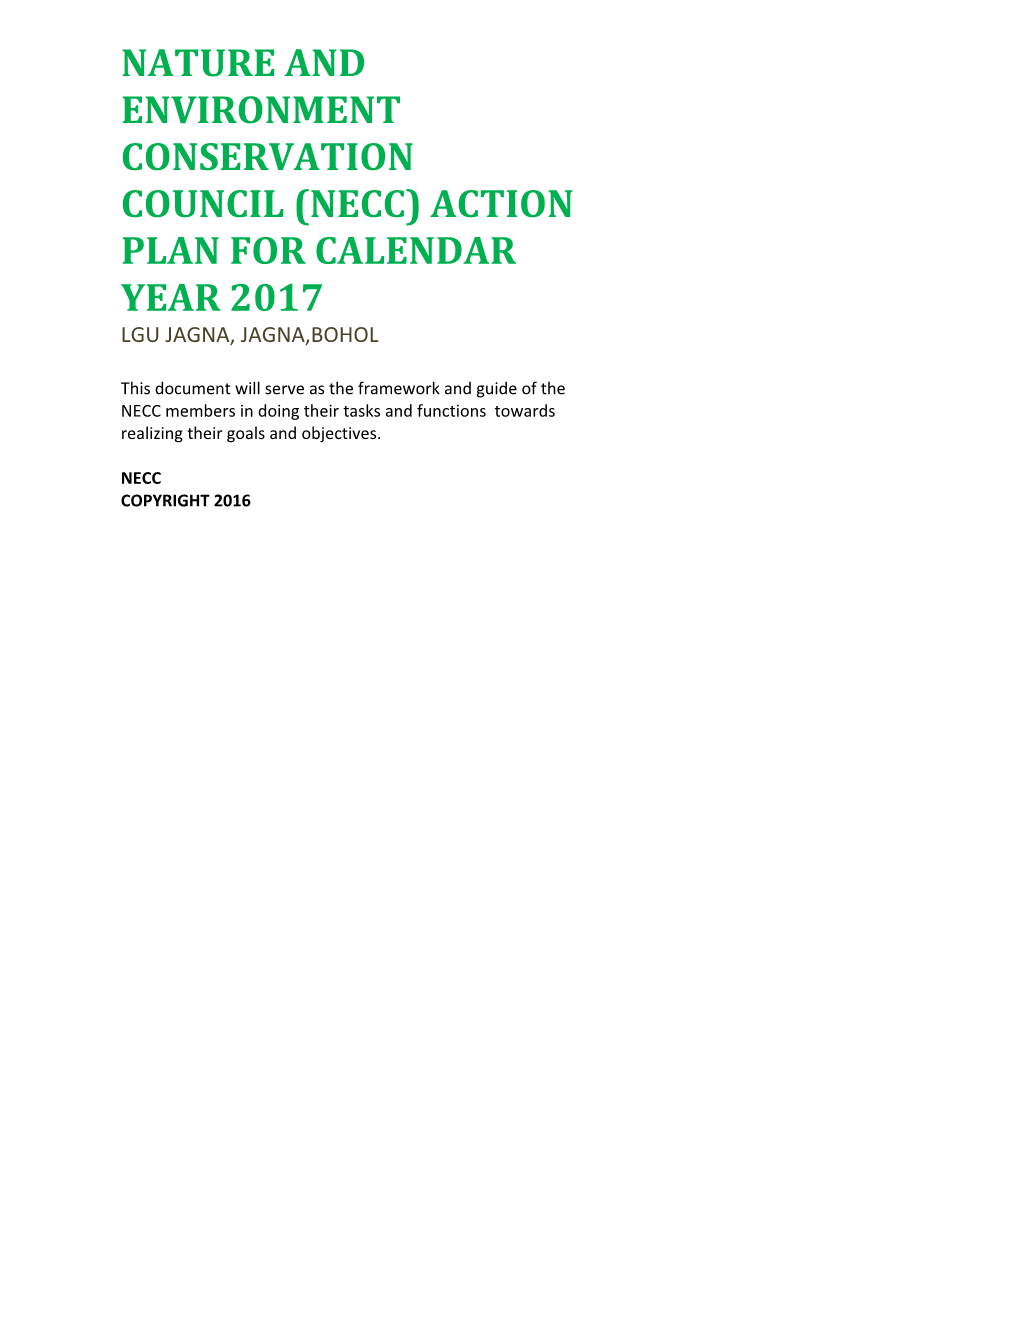 Nature and Environment Conservation Council (Necc) Action Plan for Calendar Year 2017